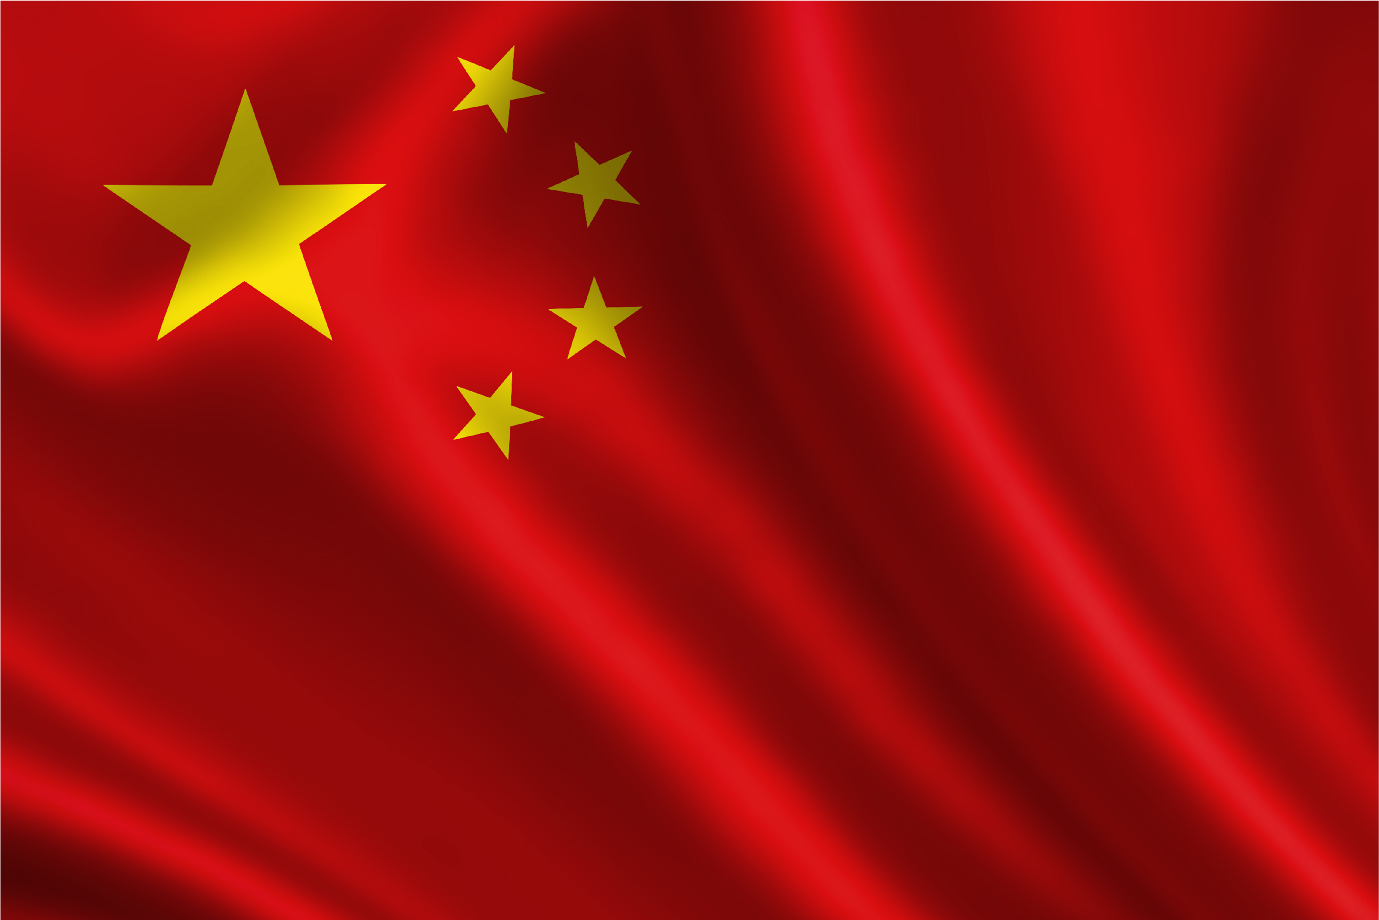 A picture of the Chinese flag